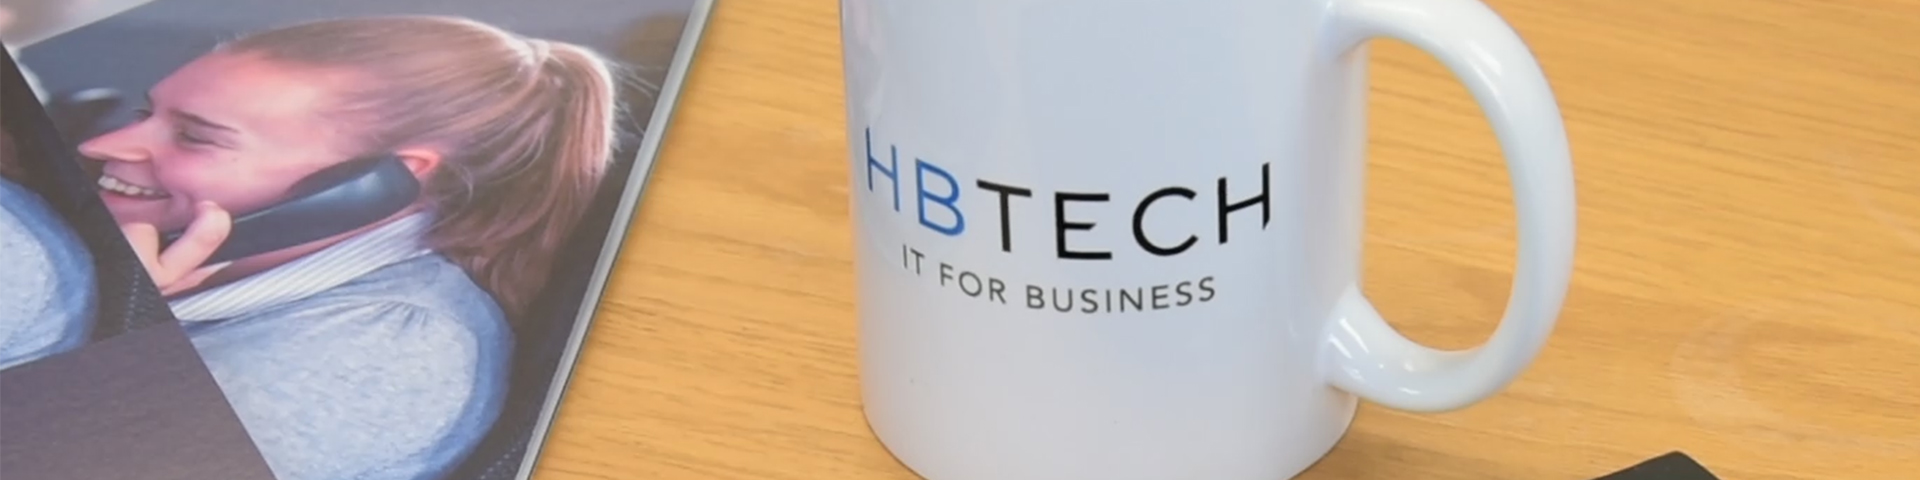  Image shows branded products by HB Tech